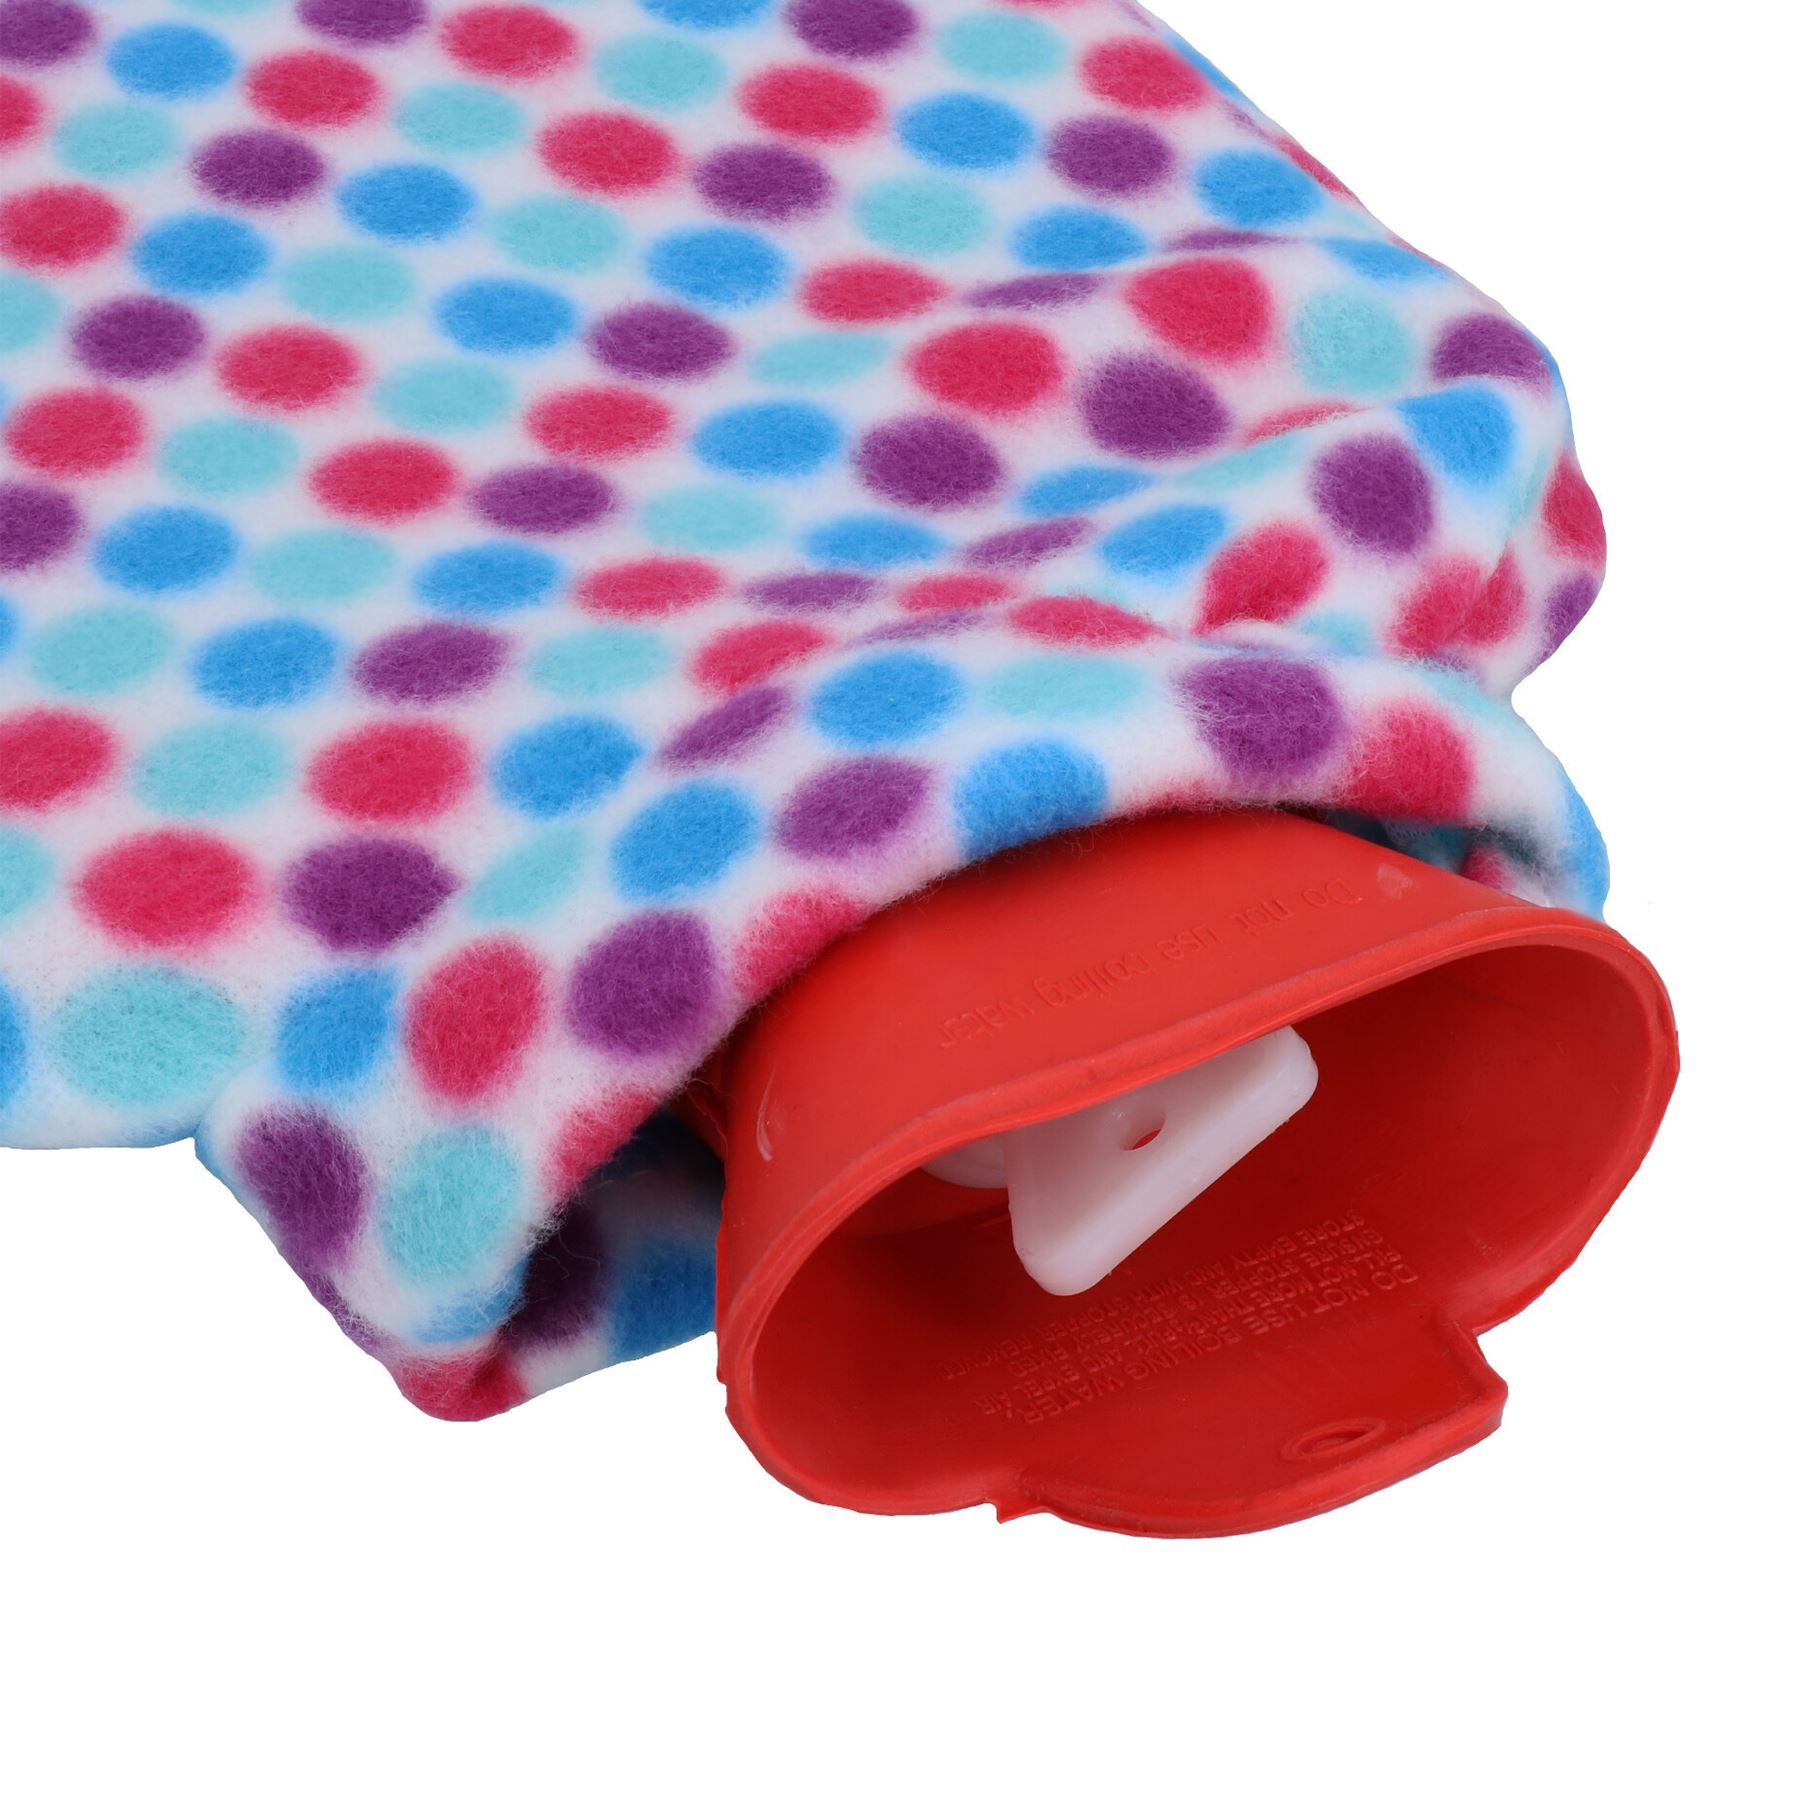 2 Litre Hot Water Bottle with Polyester Fleece Cover Cosy Revitalize Therapy